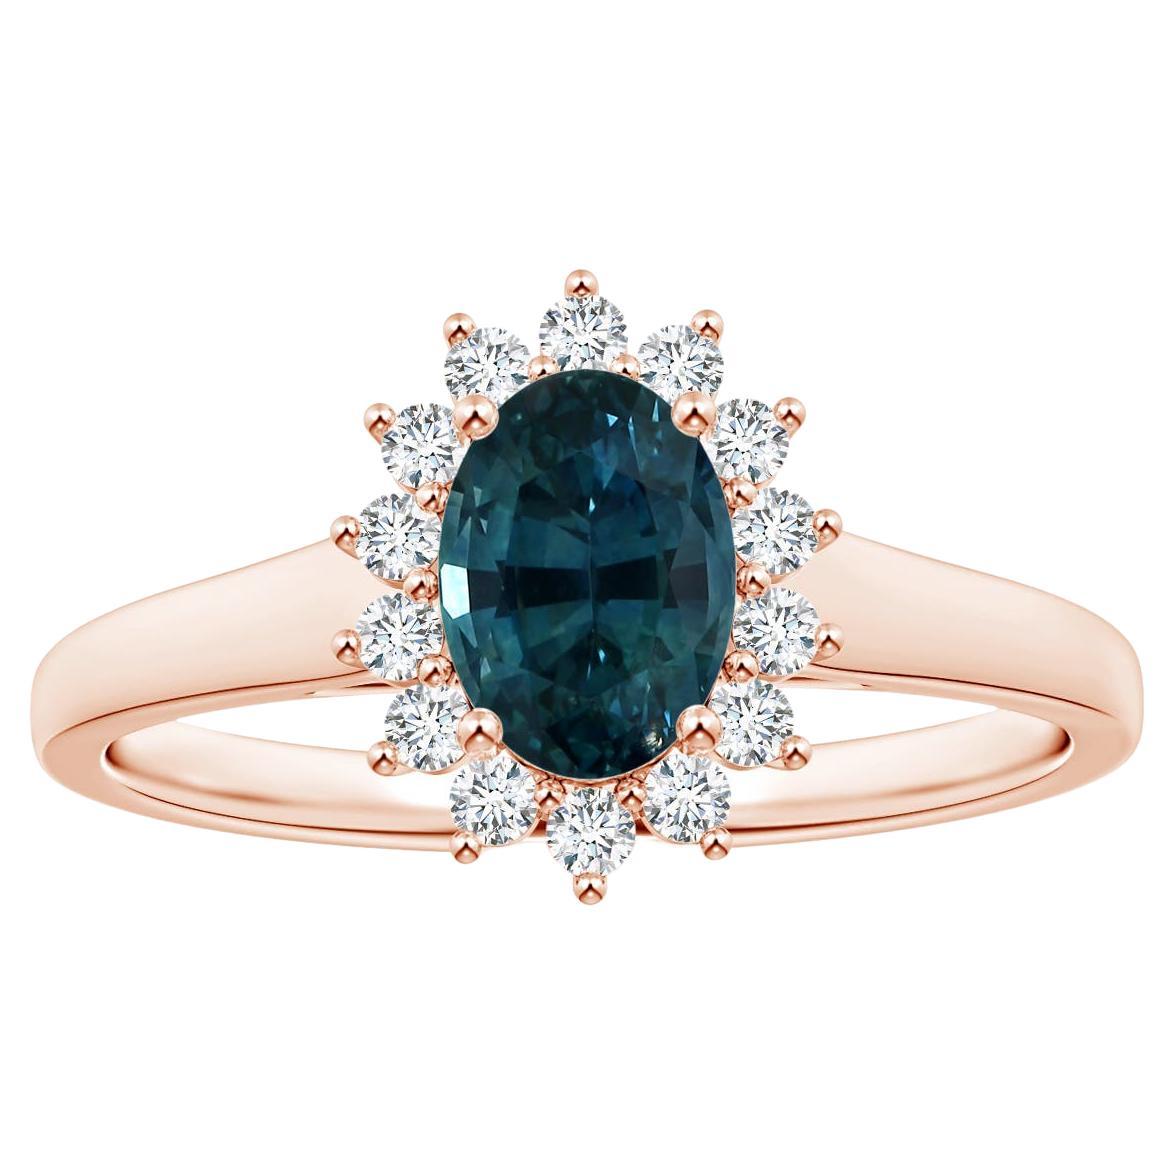 For Sale:  Angara Gia Certified Teal Sapphire Tapered Ring in Rose Gold with Halo